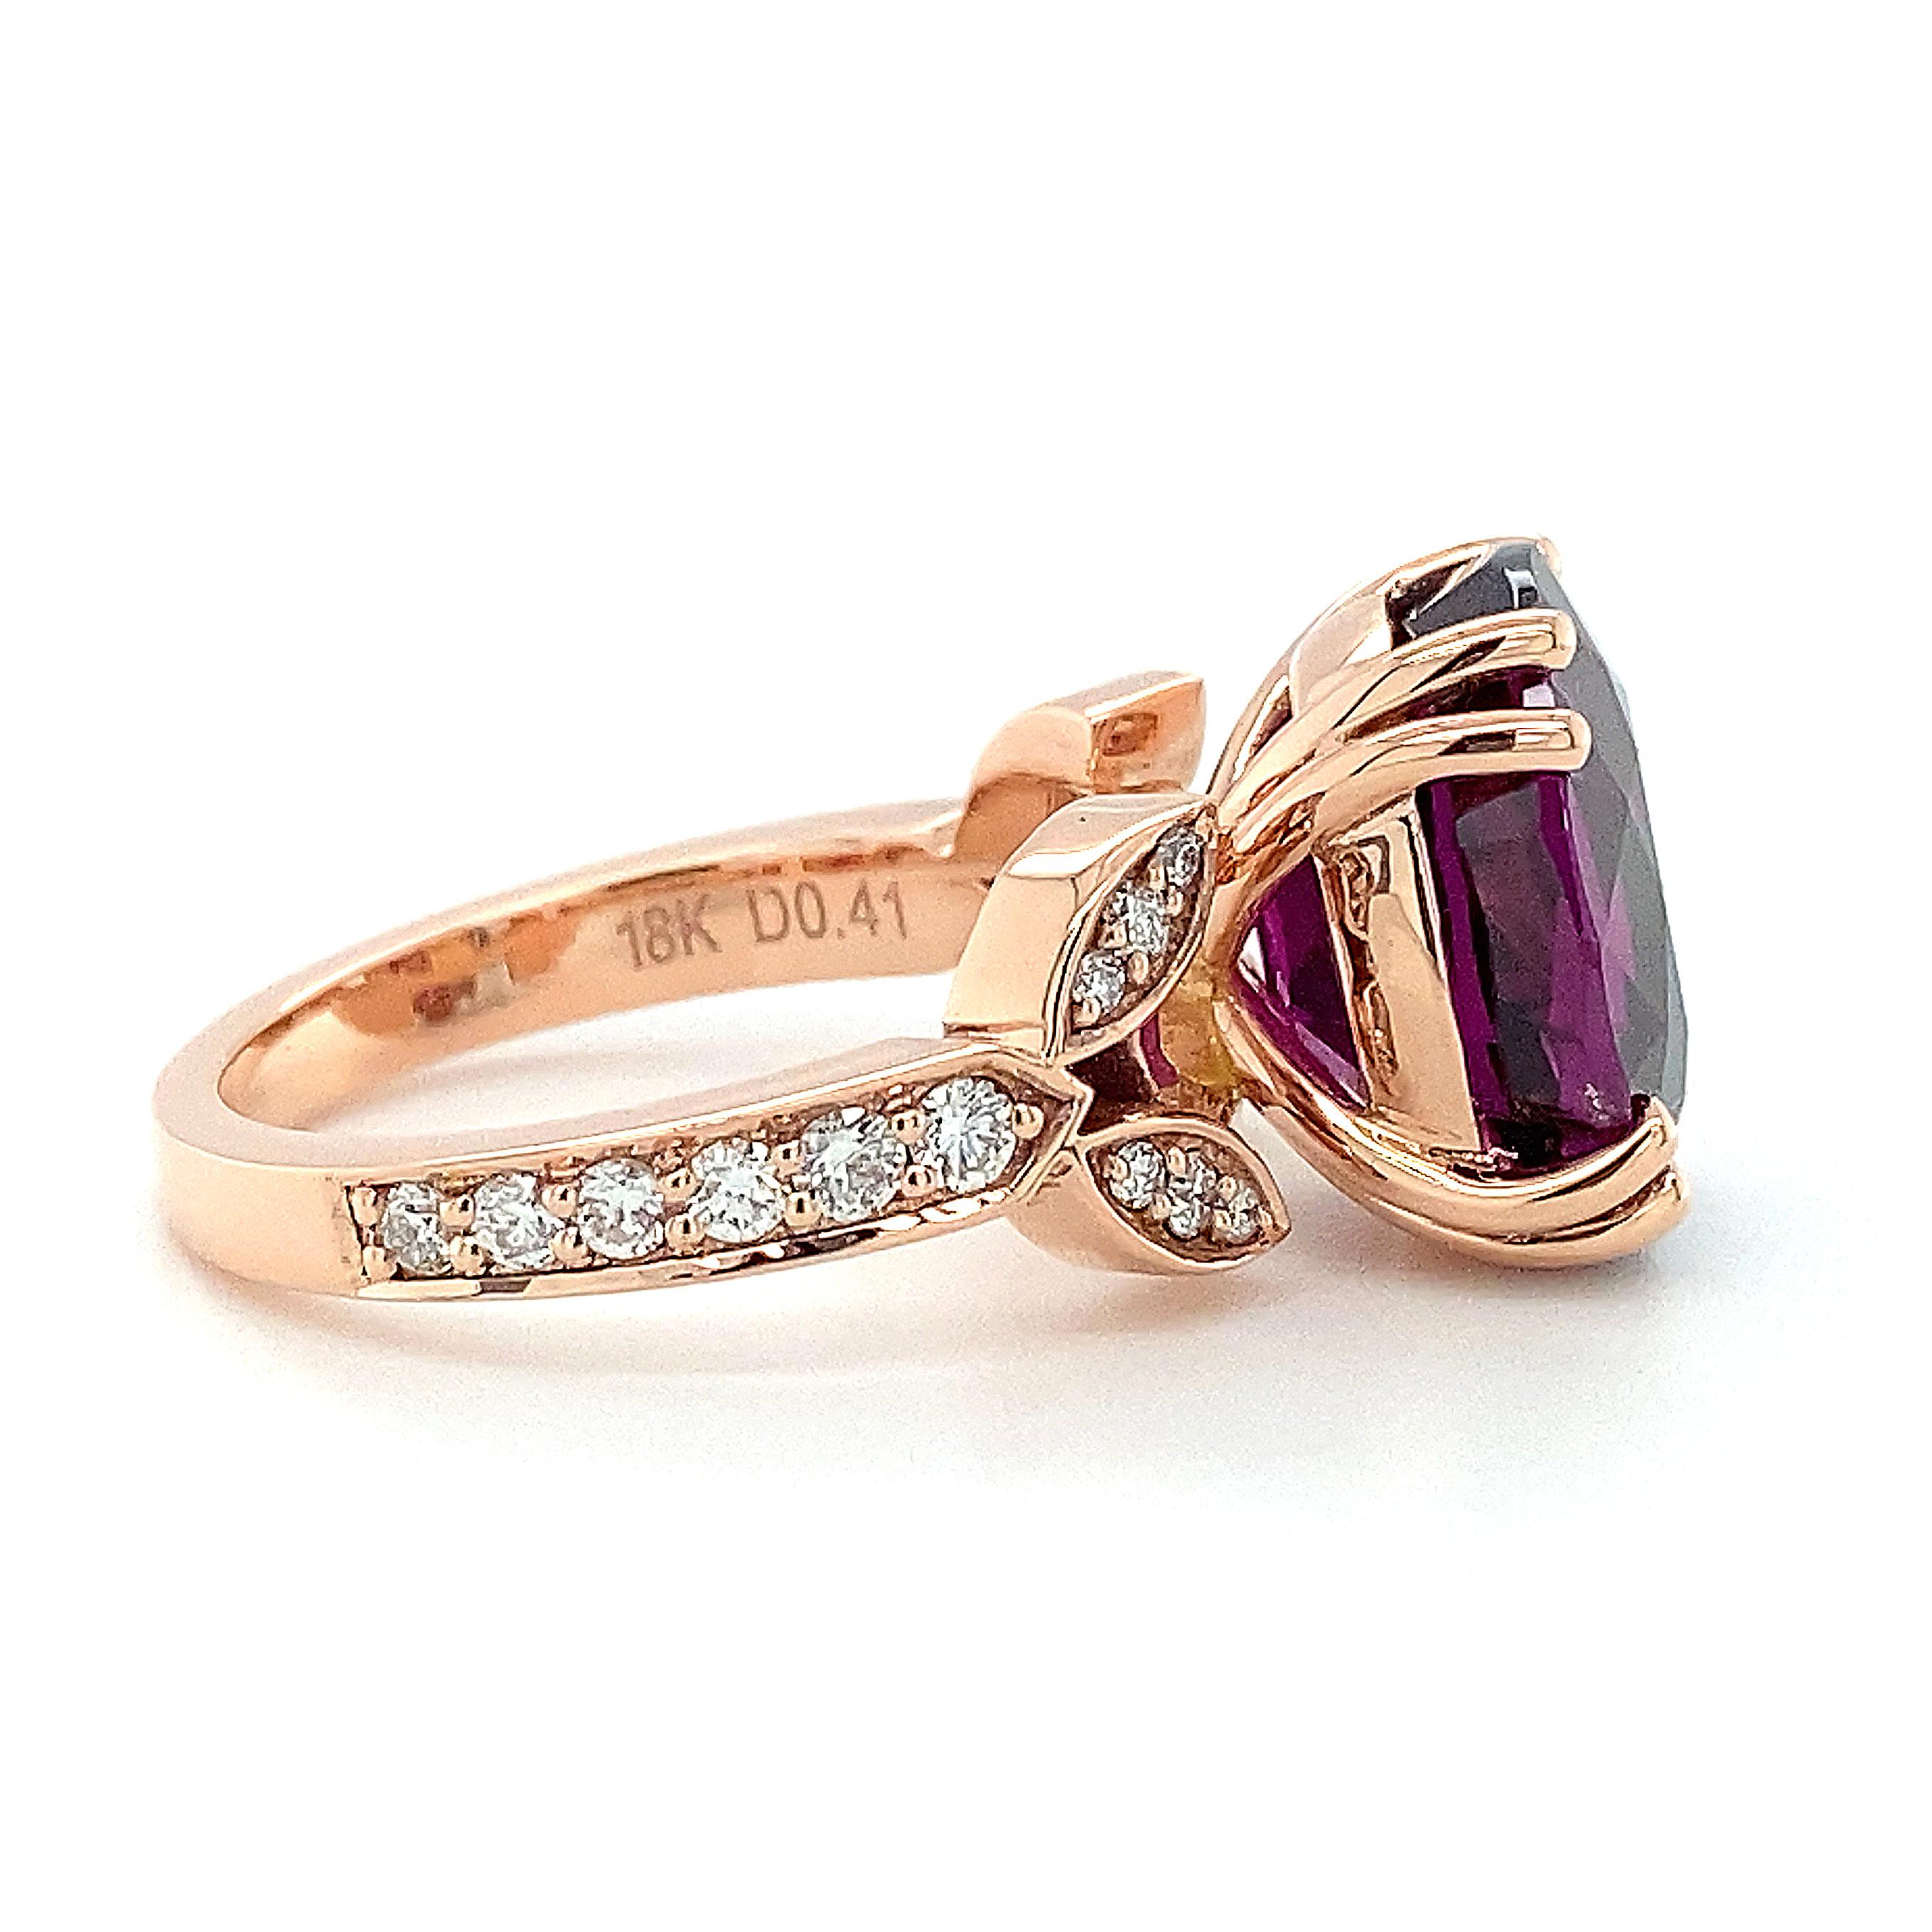 Ring Overview
SKU
3969
Center Stone
Garnet
Side Stones
Diamonds
Metal Type
18K Rose Gold
Metal Weight
7.36 gr
Size
7


Center Stone
Quantity
1
Total Weight
9.35 carats
Color
Purple
Color intensity
Vivid
Shape
Oval
Clarity
Very eye